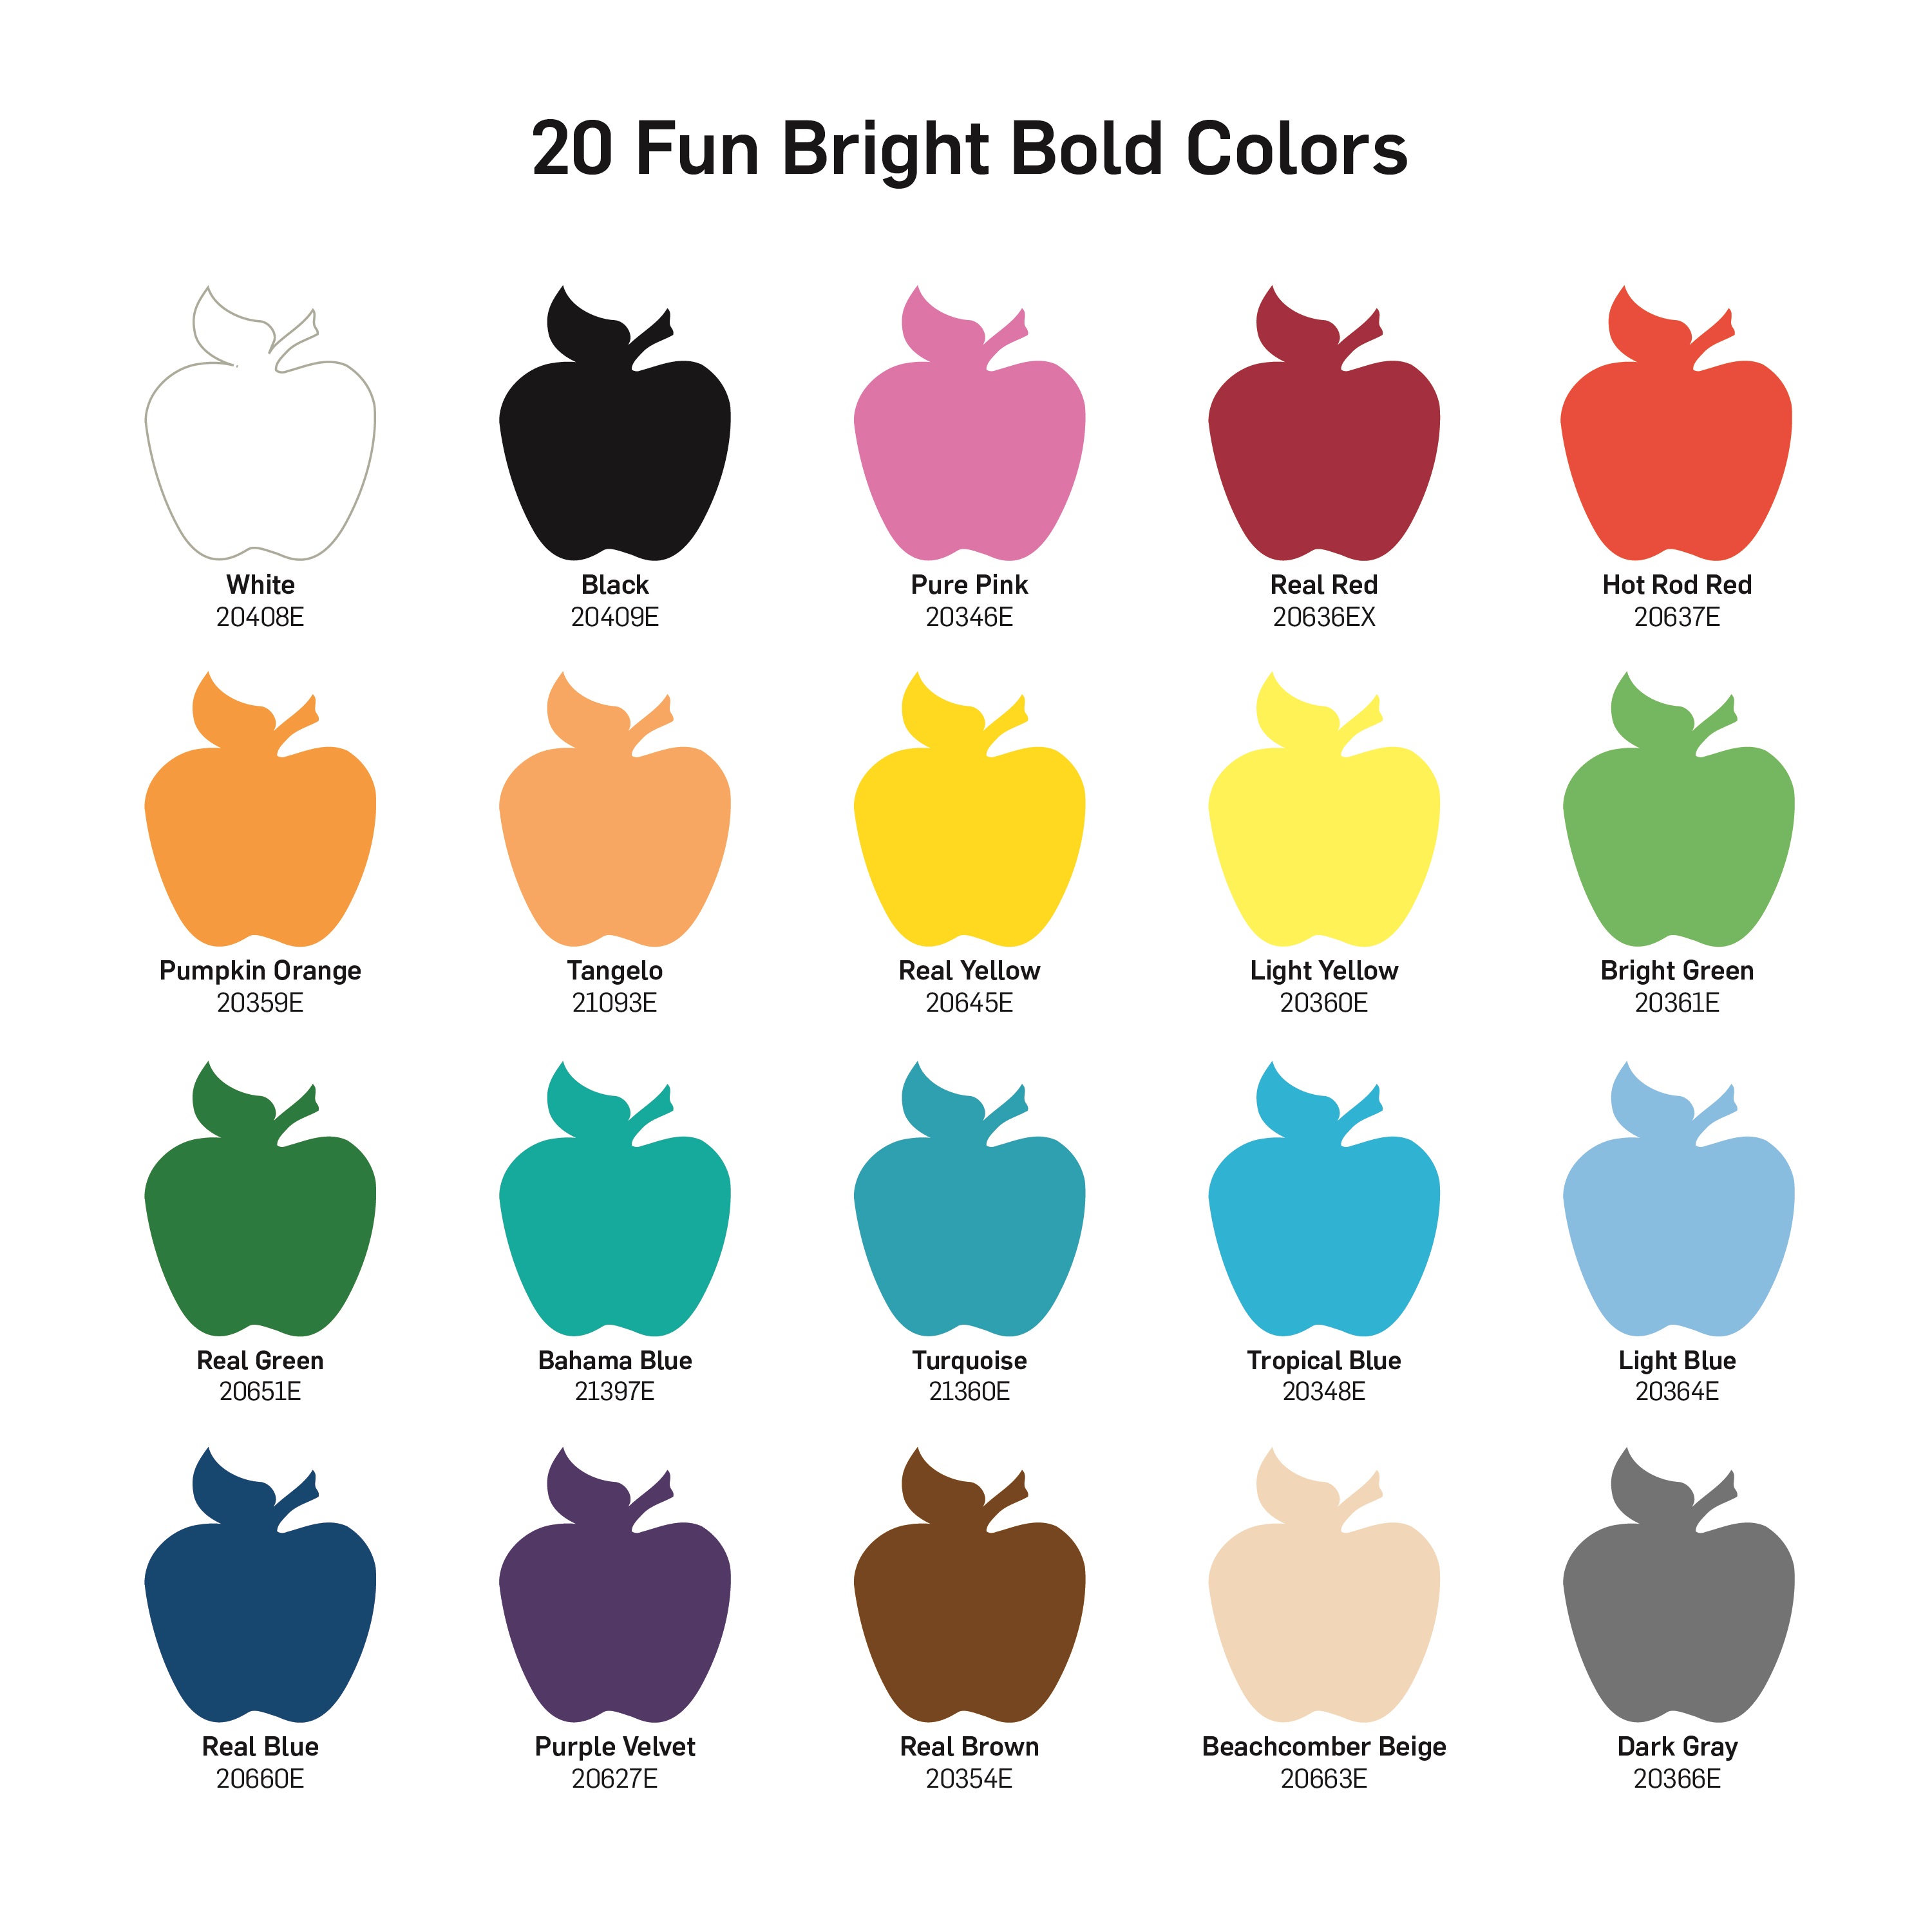 Apple Barrel Multi-color Gloss Acrylic Craft Paint (20 Pieces) - image 3 of 9